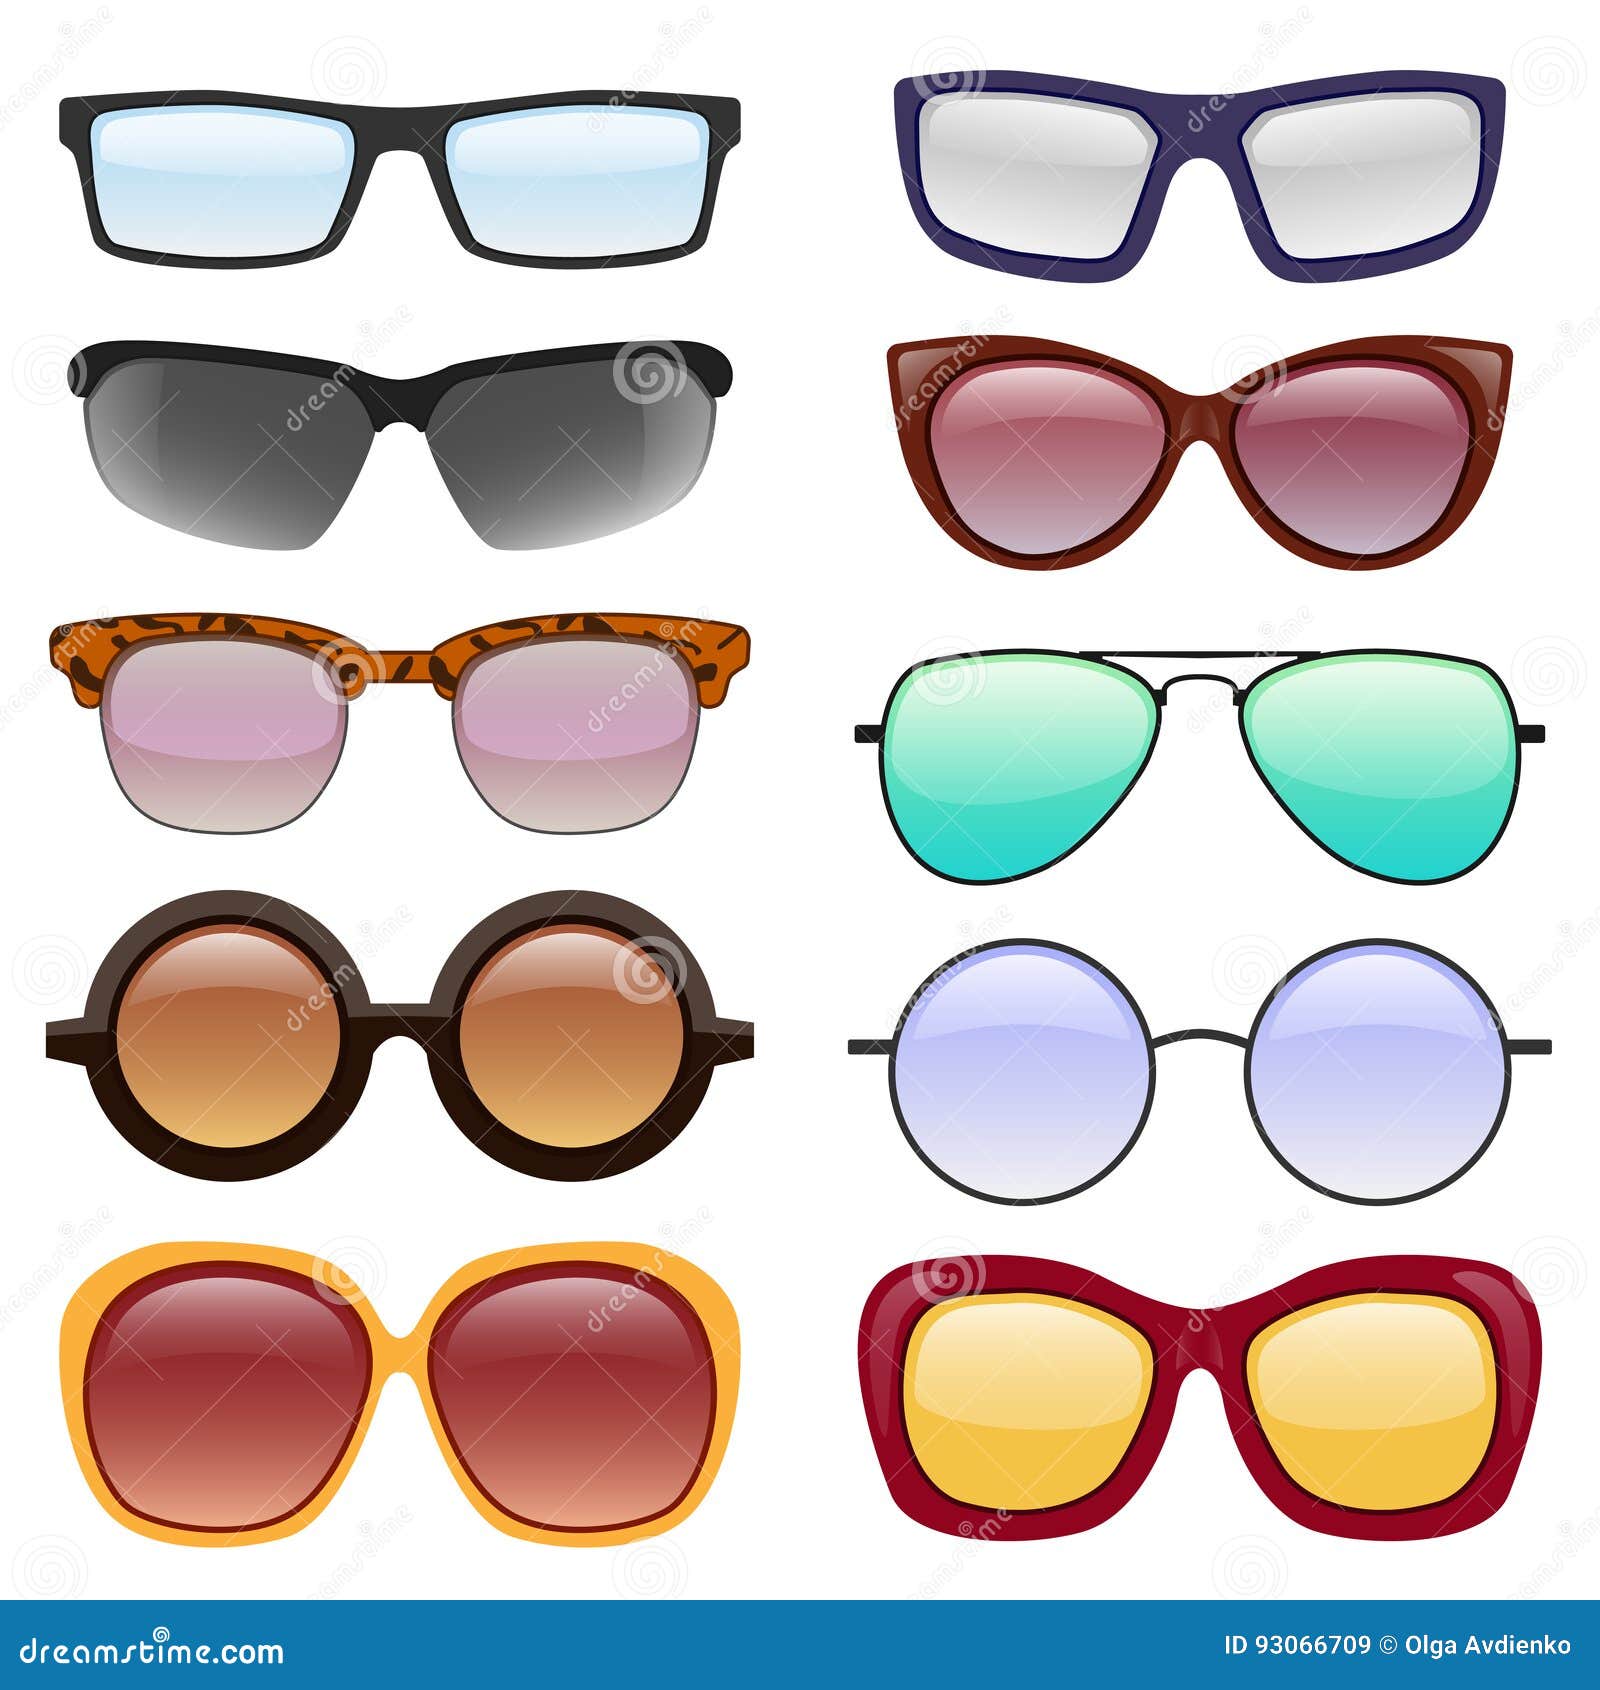  collection of eyeglasses and sunglasses.